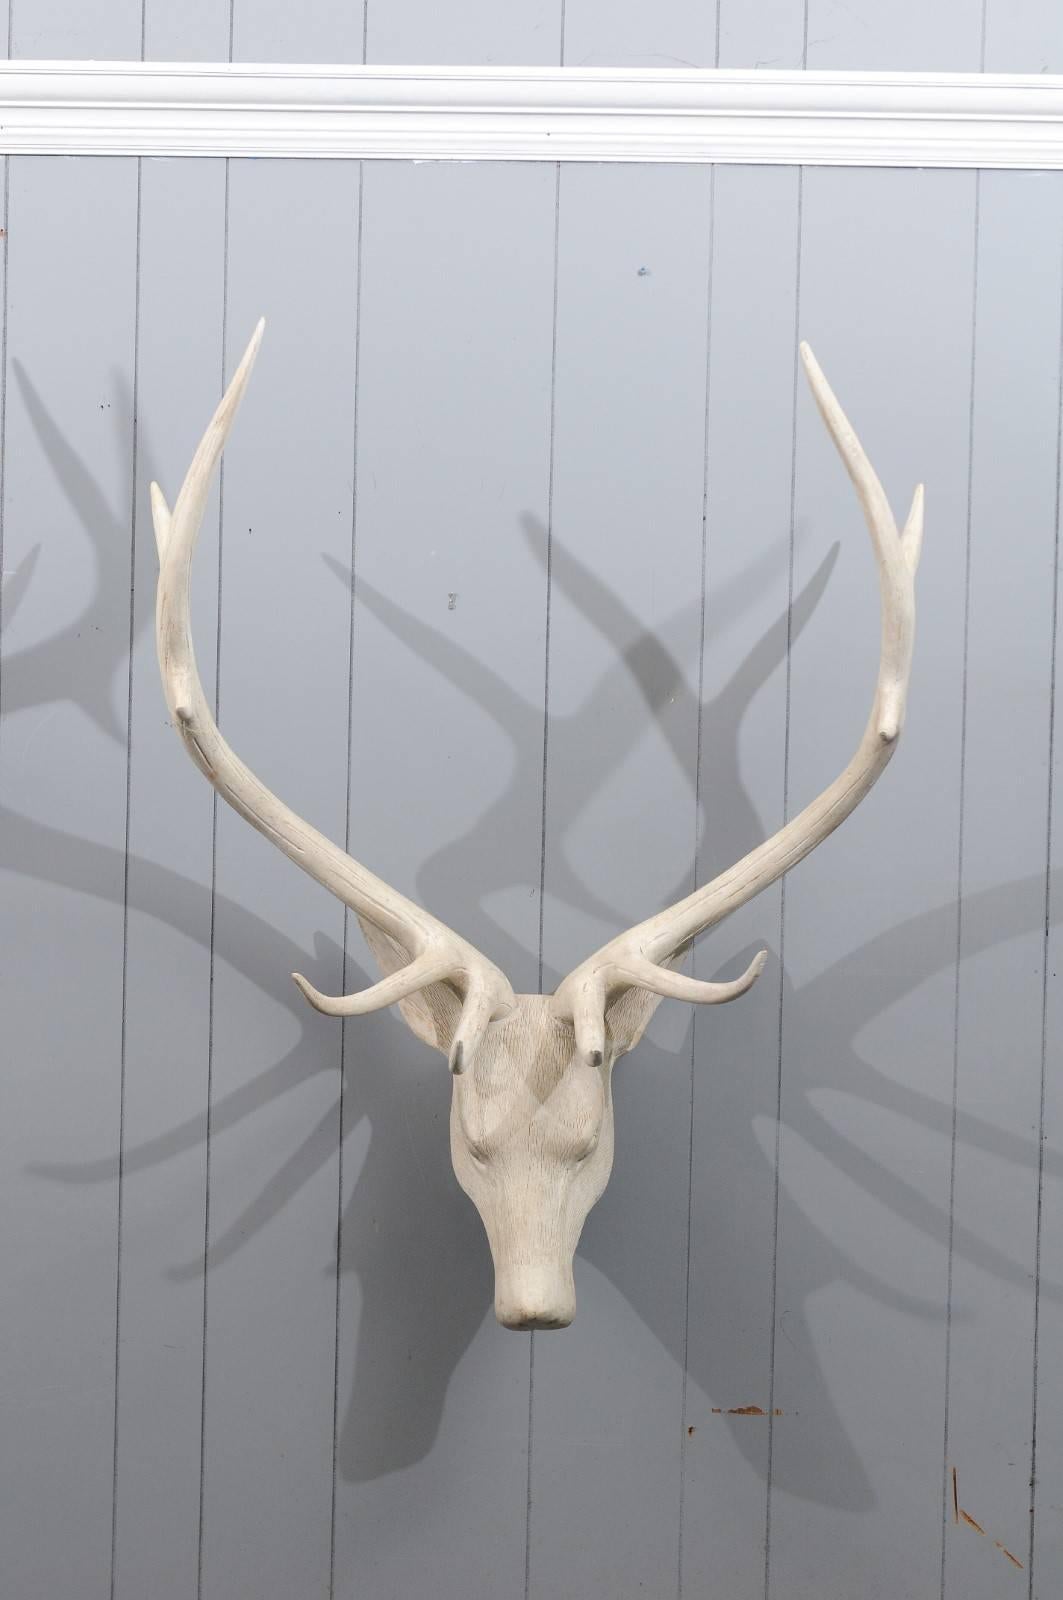 A French carved and painted wood deer head sculpture from the mid-20th century, with large antlers. This French deer head sculpture exudes a striking presence. The nicely detailed surface along with the expressive face are perfectly emphasized by